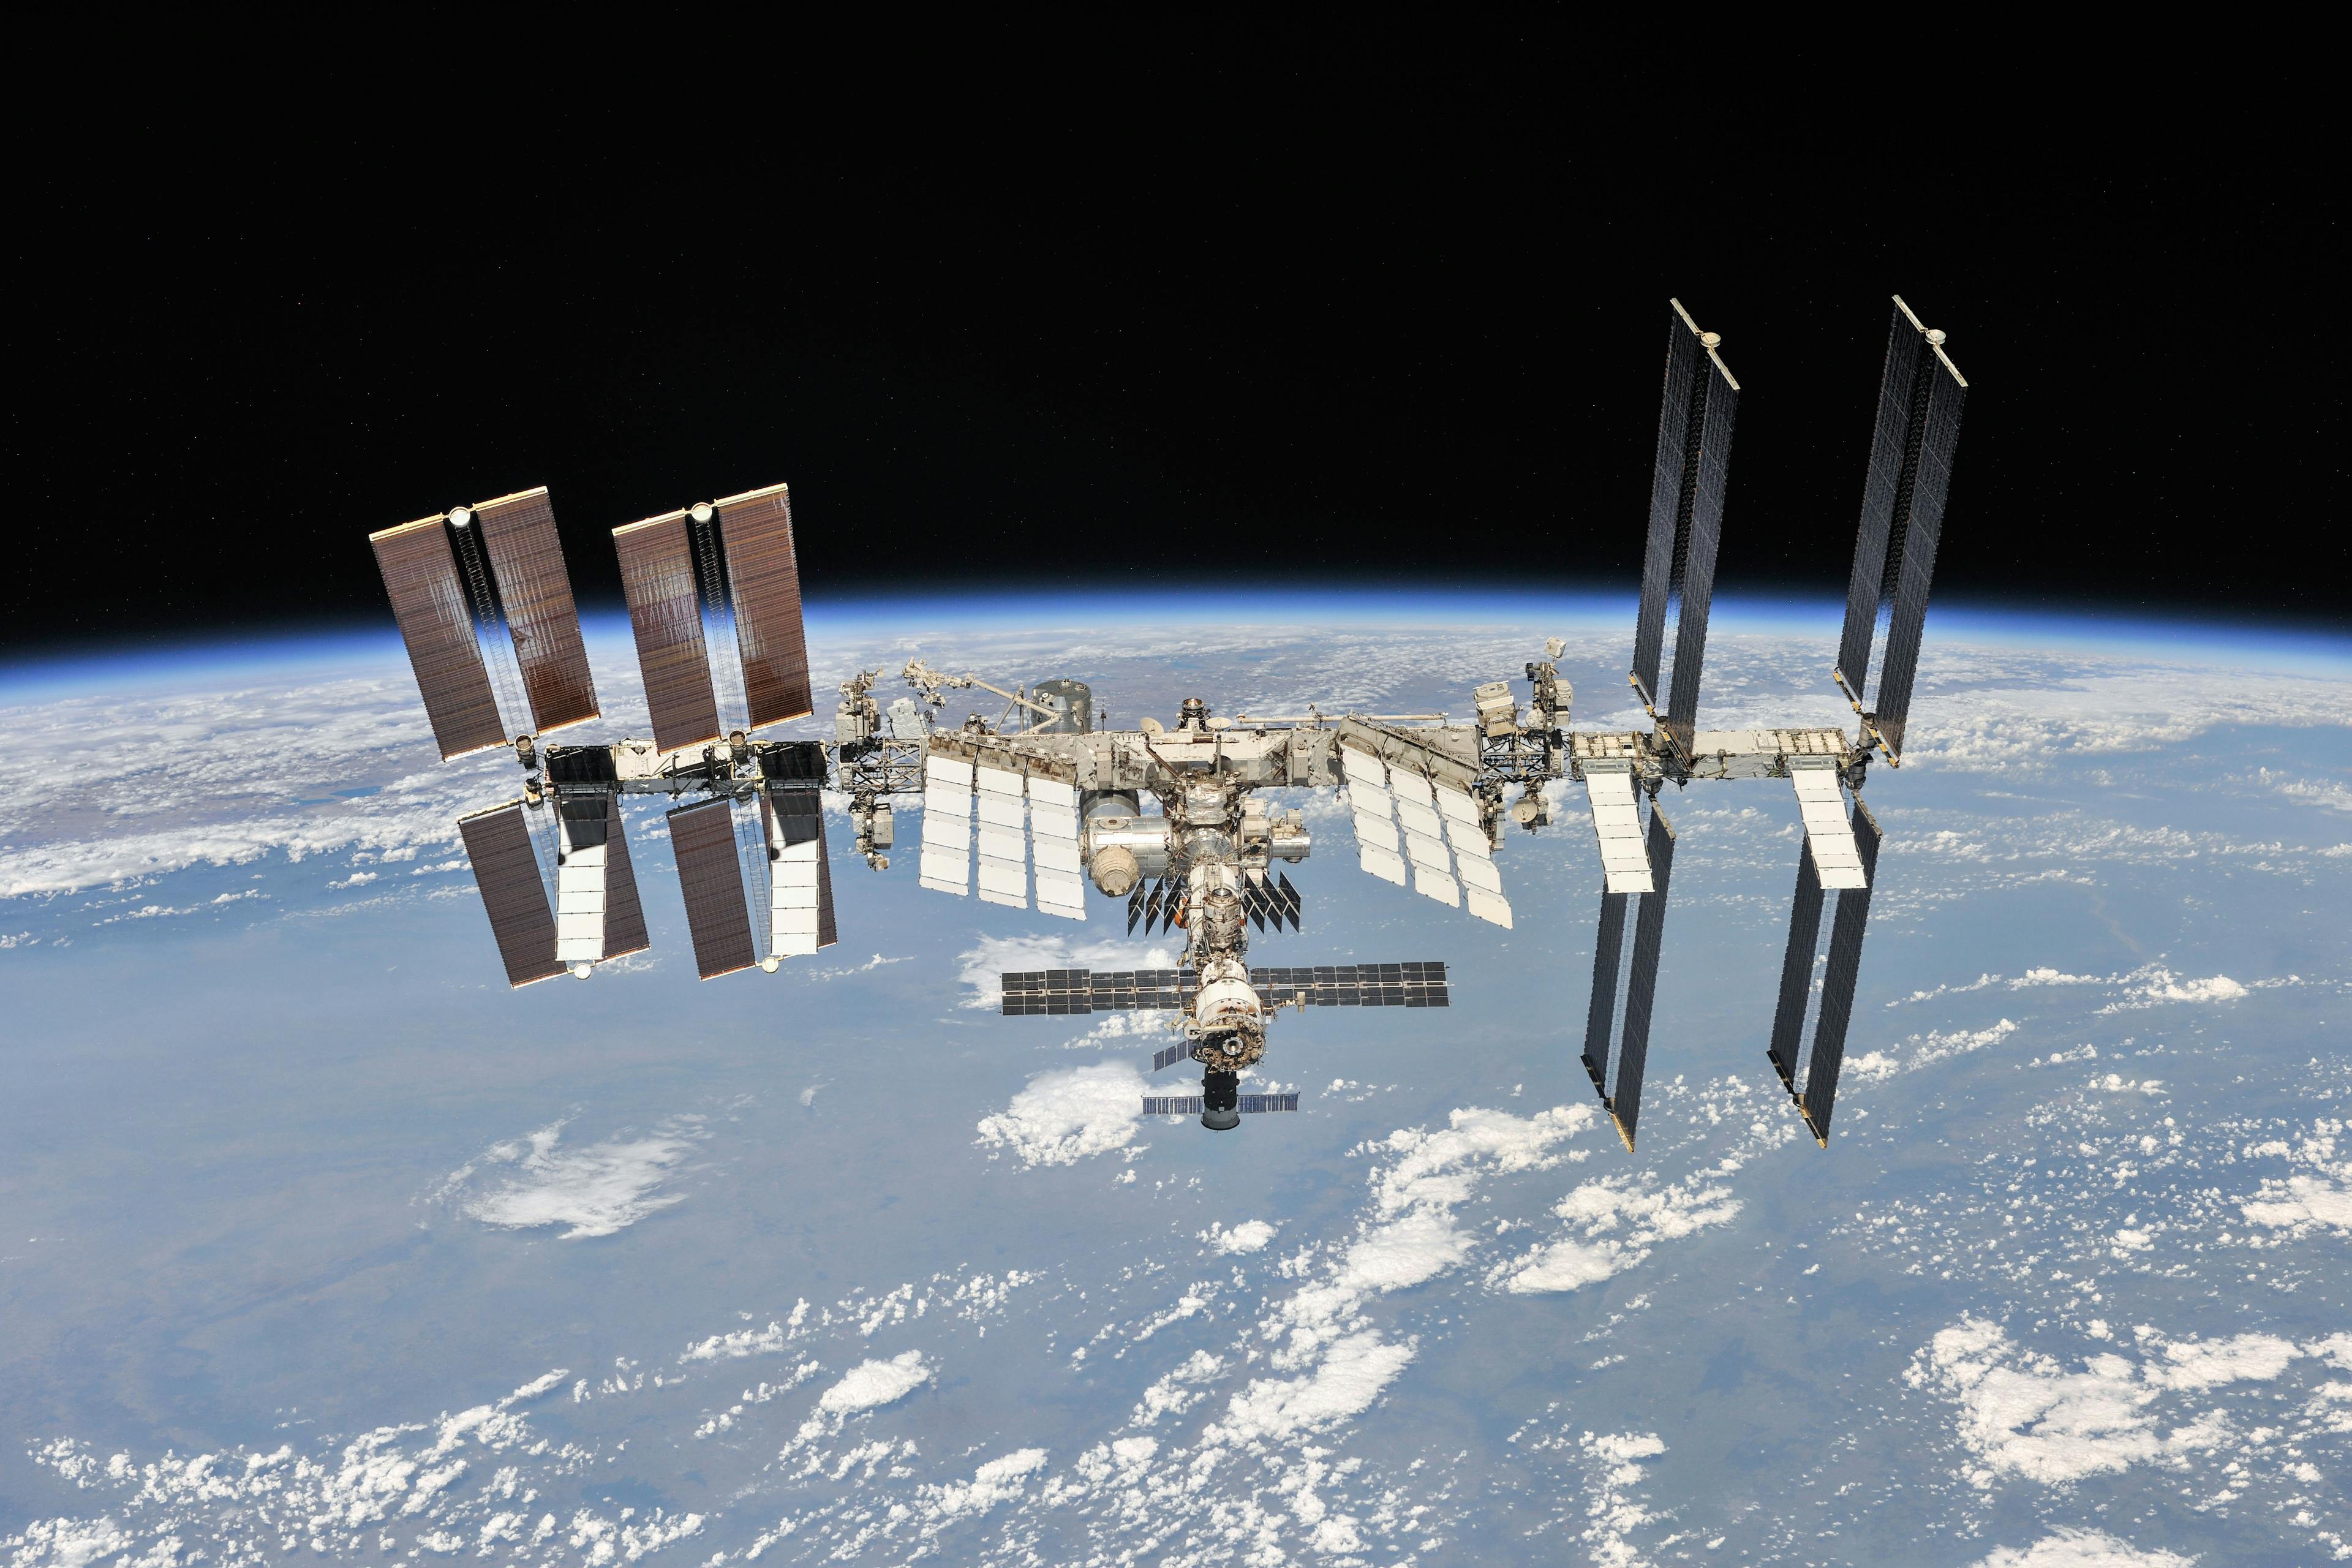 What Is the Purpose of the International Space Station?